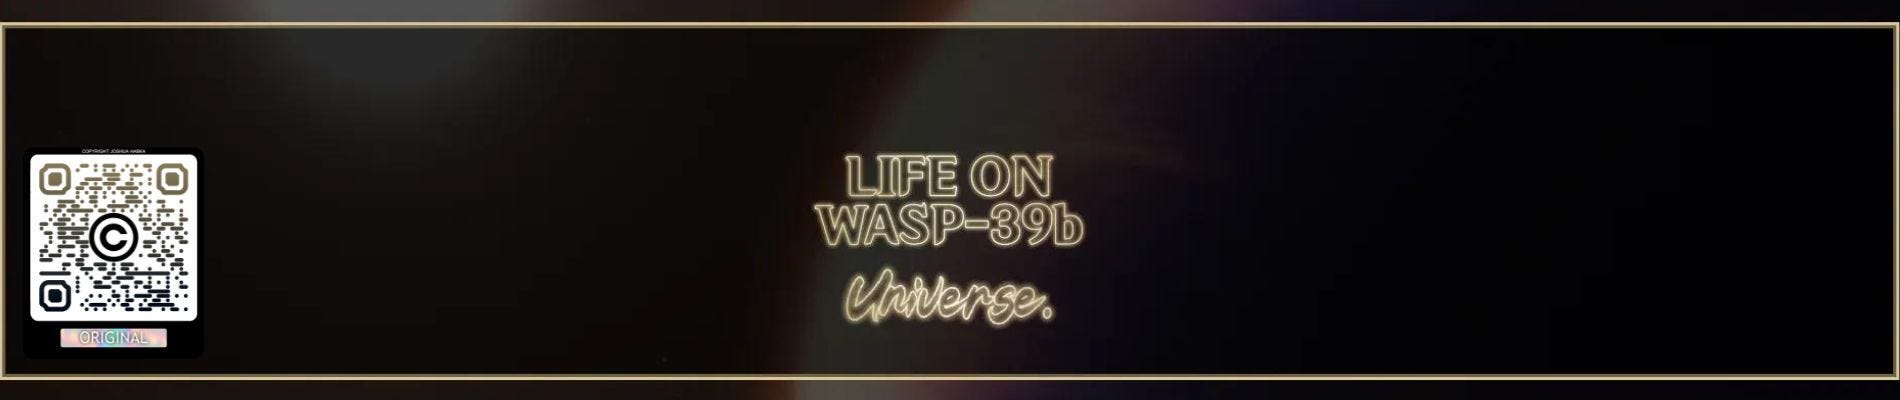 Is There Life on WASP-39b-